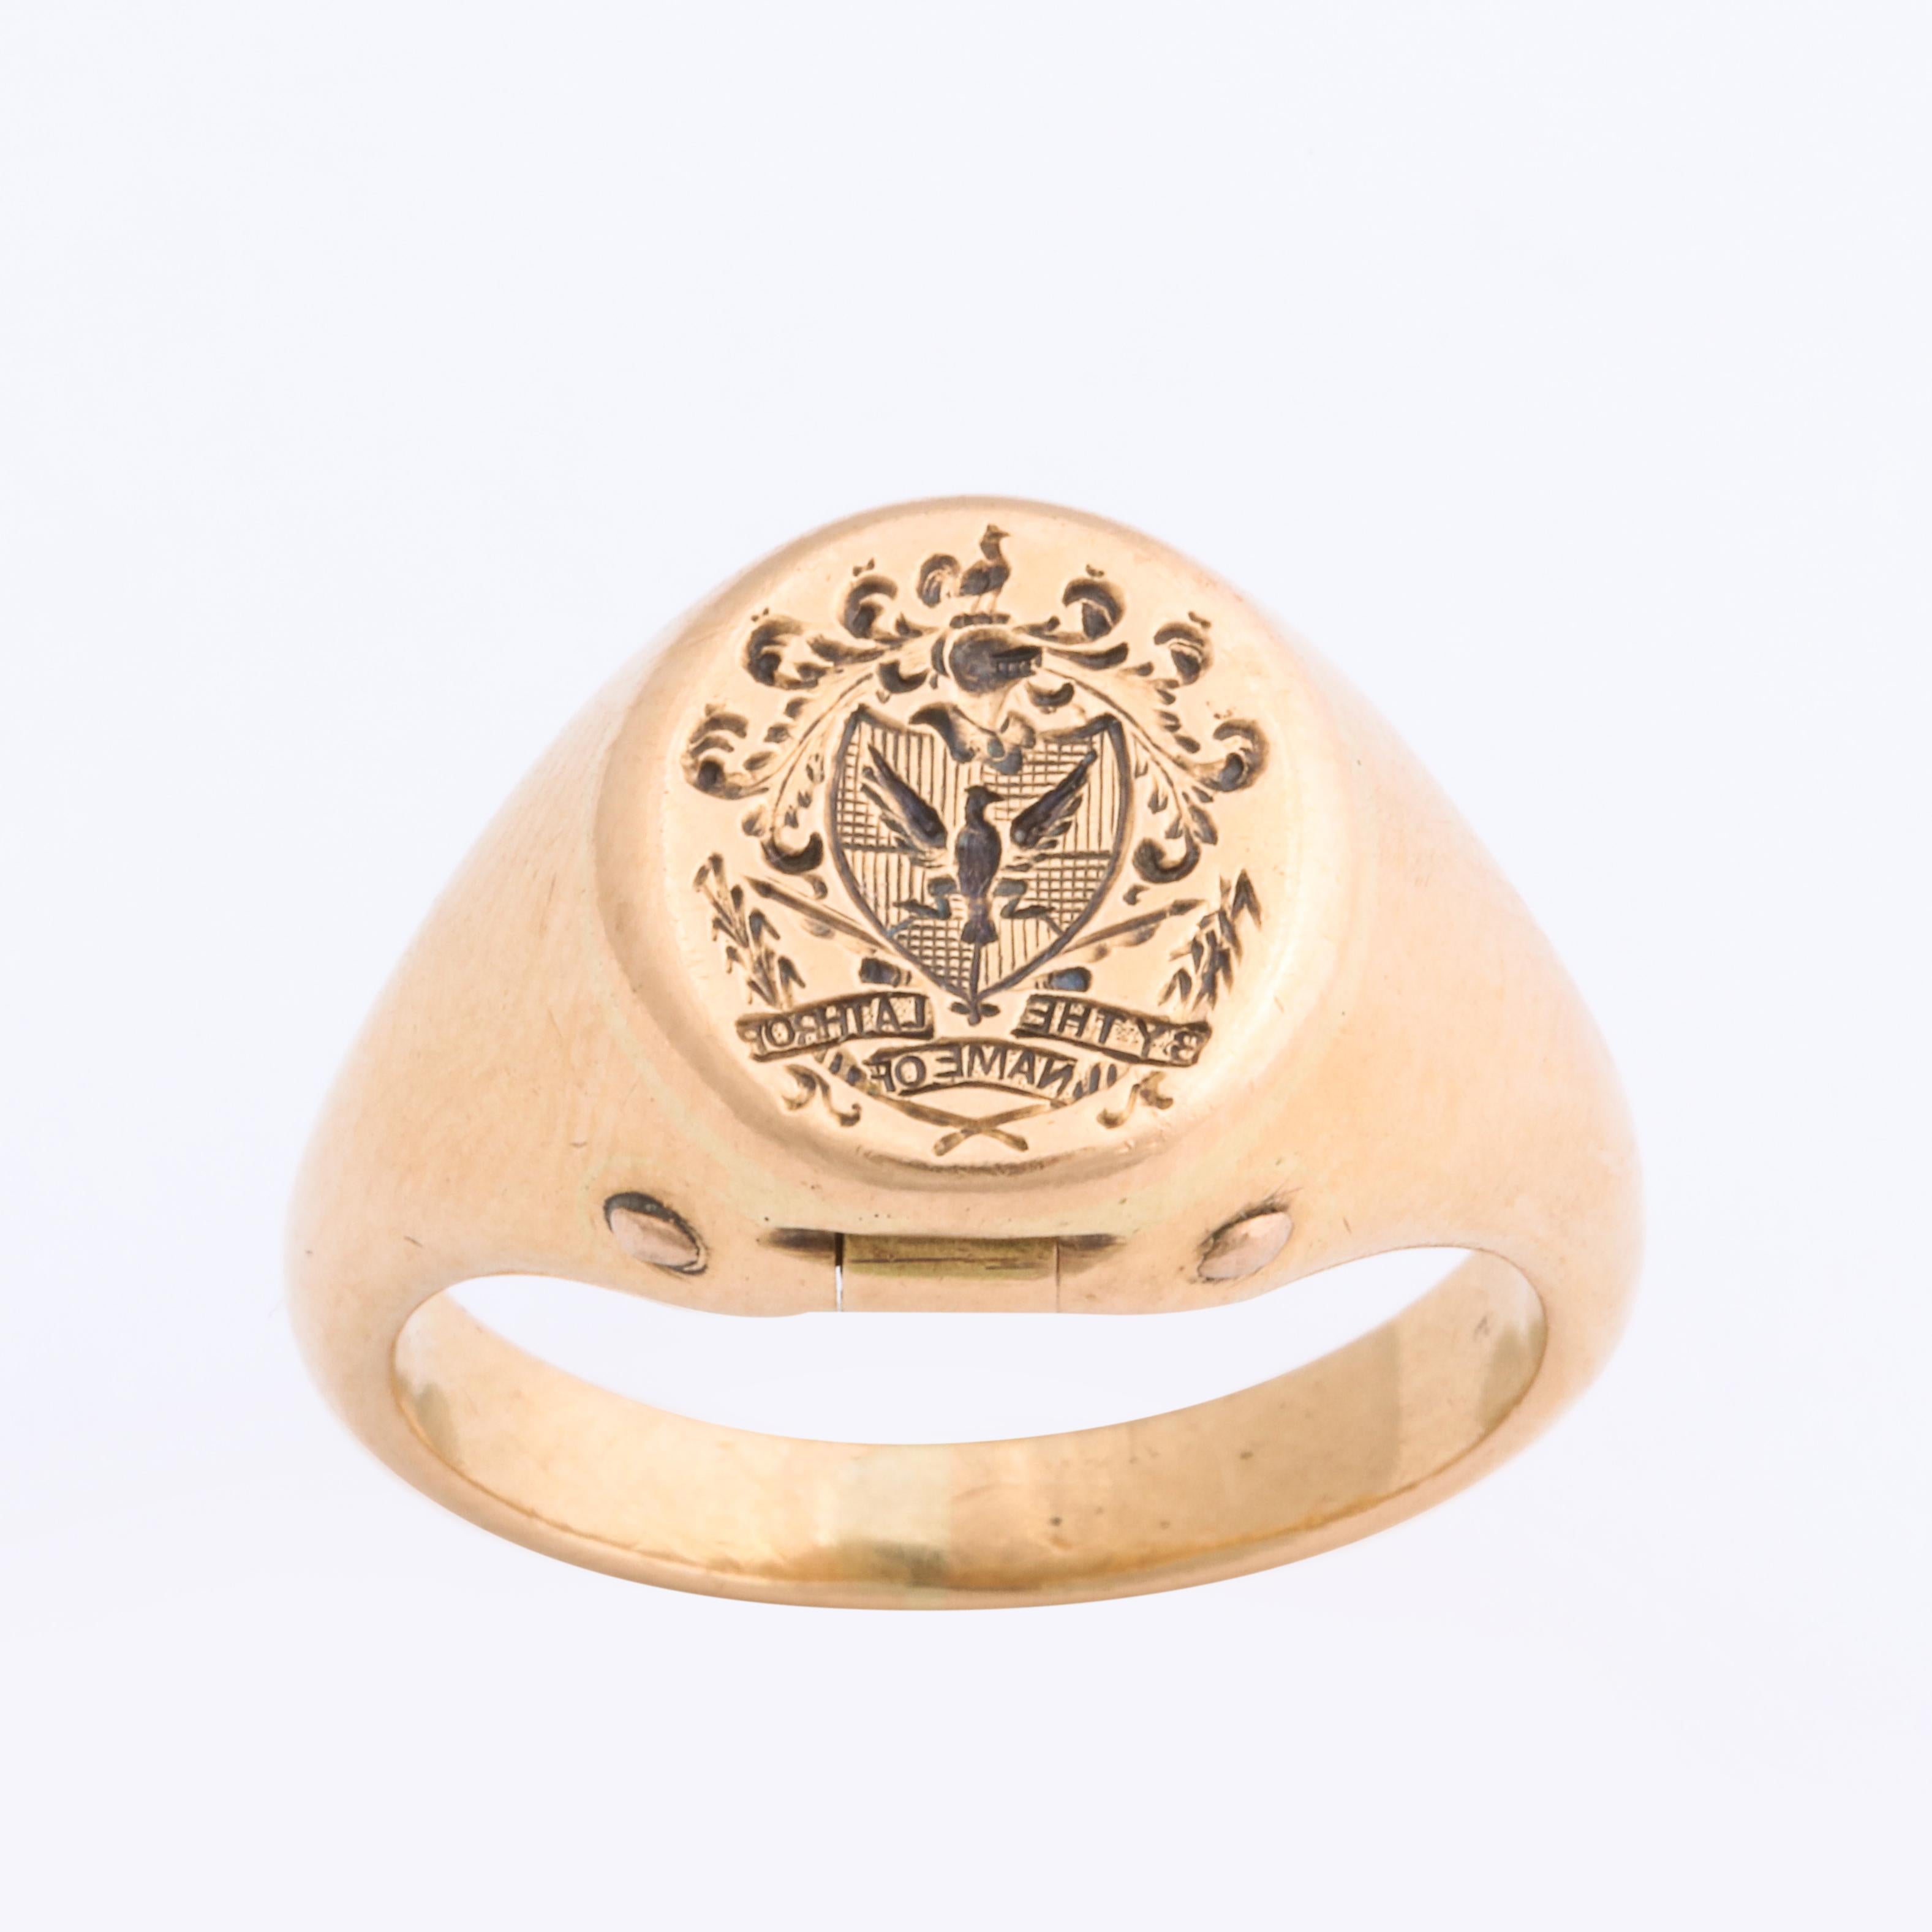 A Victorian 15 Kt signet ring with an intricate crest is a simple oval shape and hides a key on the inside that fits into the frame behind the crest.  The key collapses into the shank and is not felt or seen when worn. What did the key open; a safe,